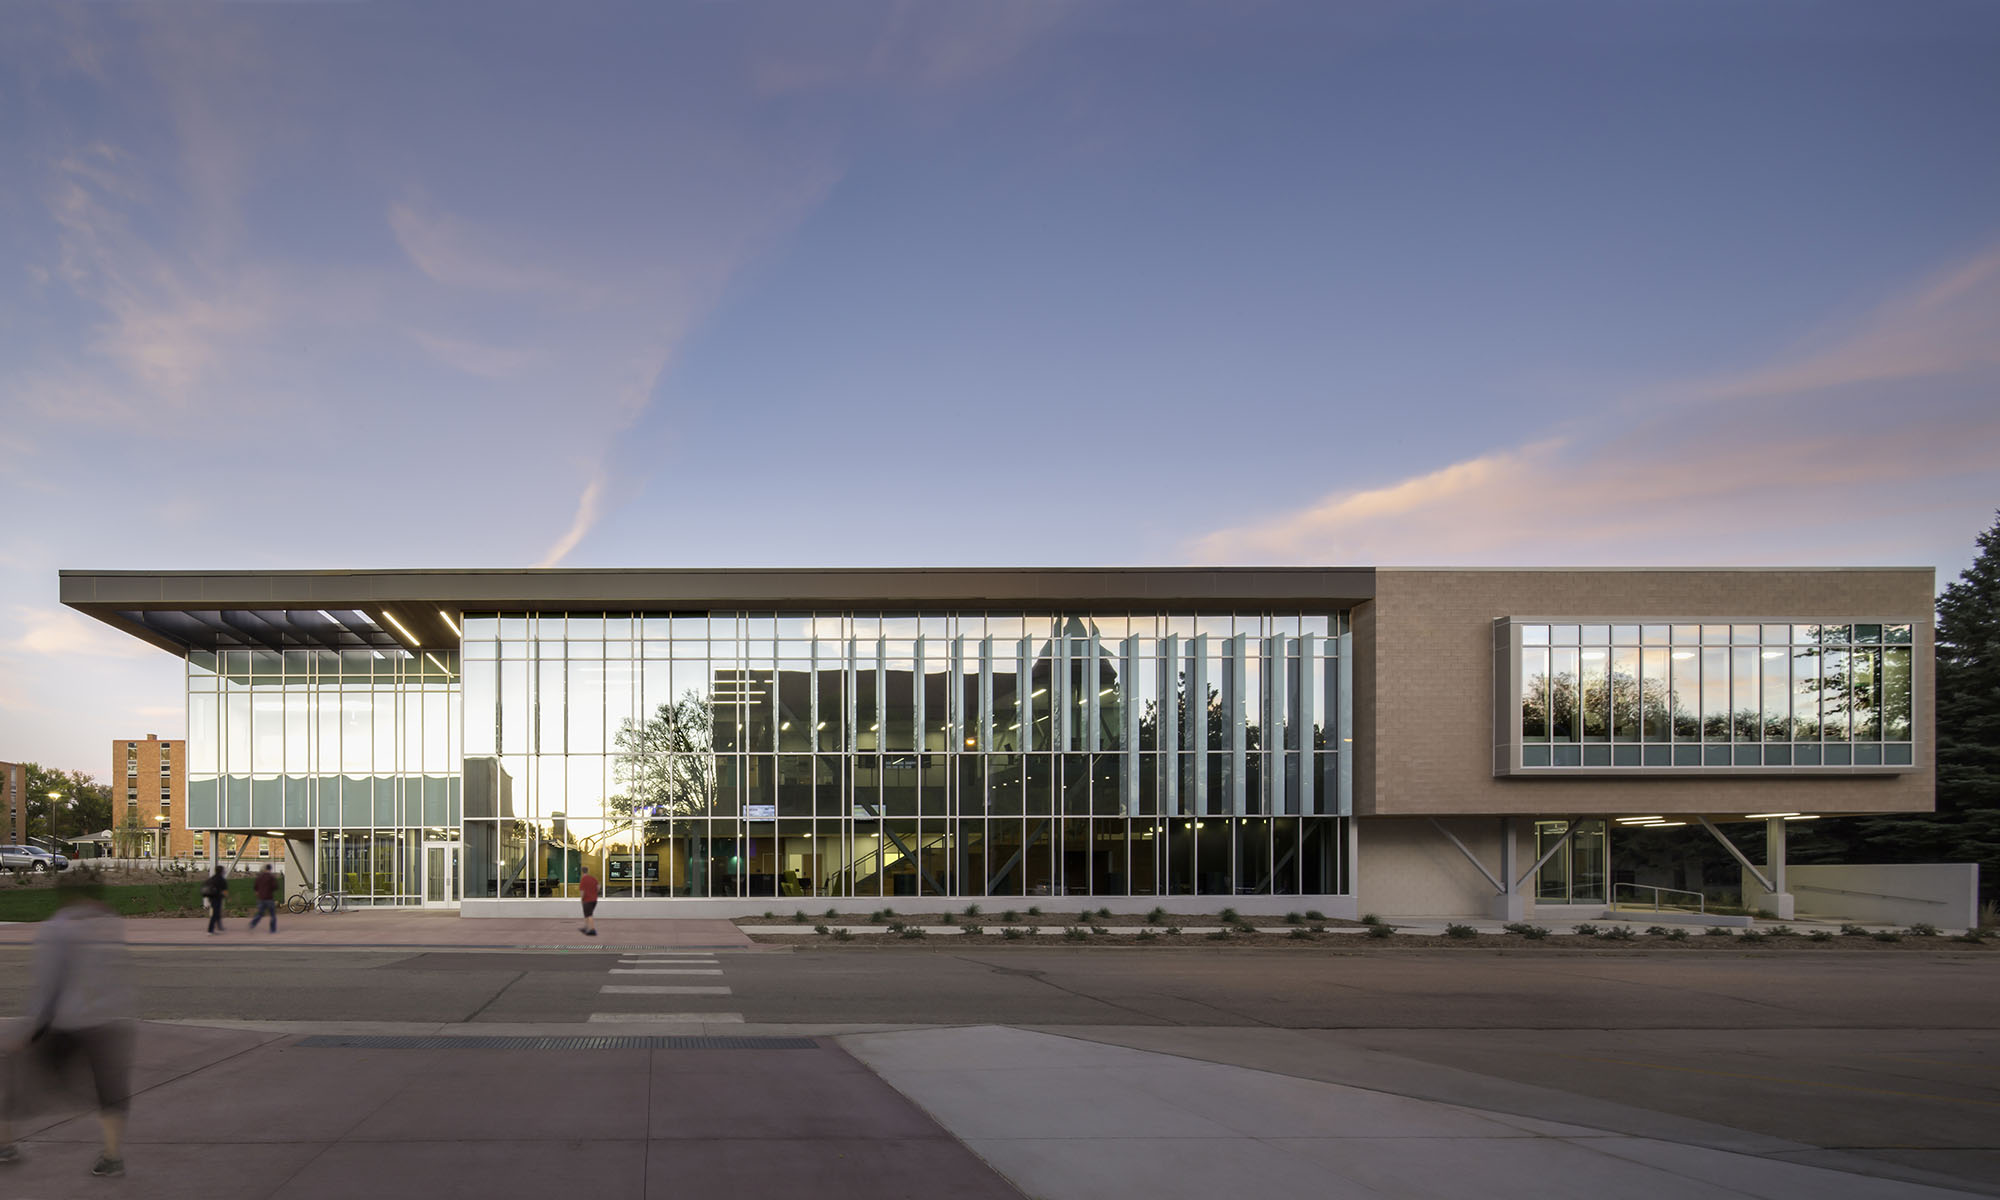 DSU Beacom Institute Of Technology, Madison, S.D., TSP Inc., photos by Winquist Photography (Architecture category entry)